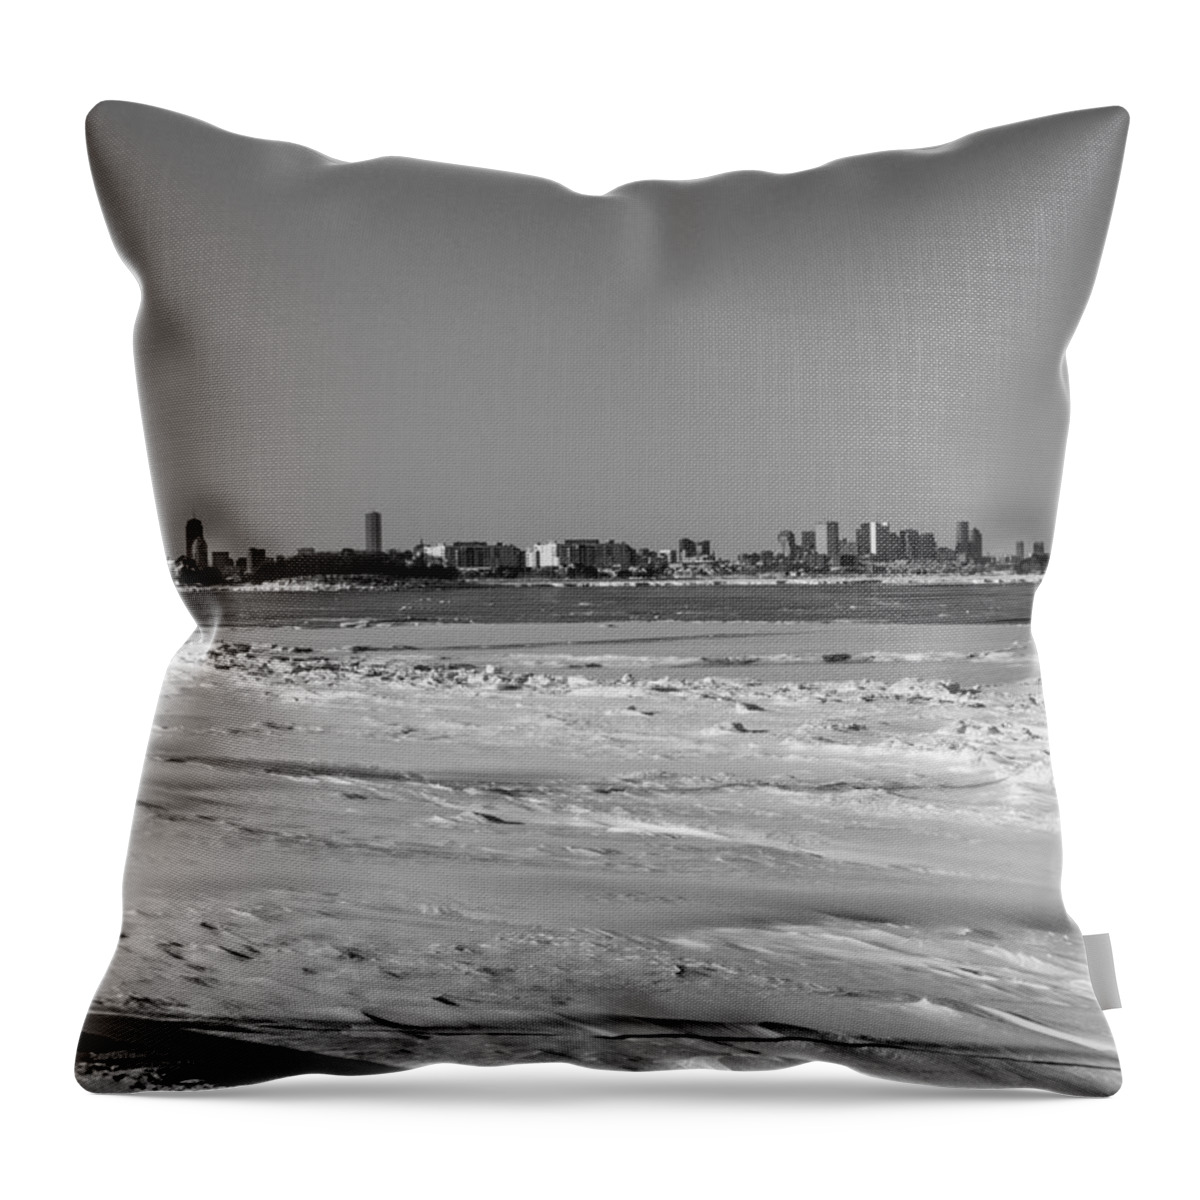 Snowy Wollaston Throw Pillow featuring the photograph Snowy Wollaston by Brian MacLean